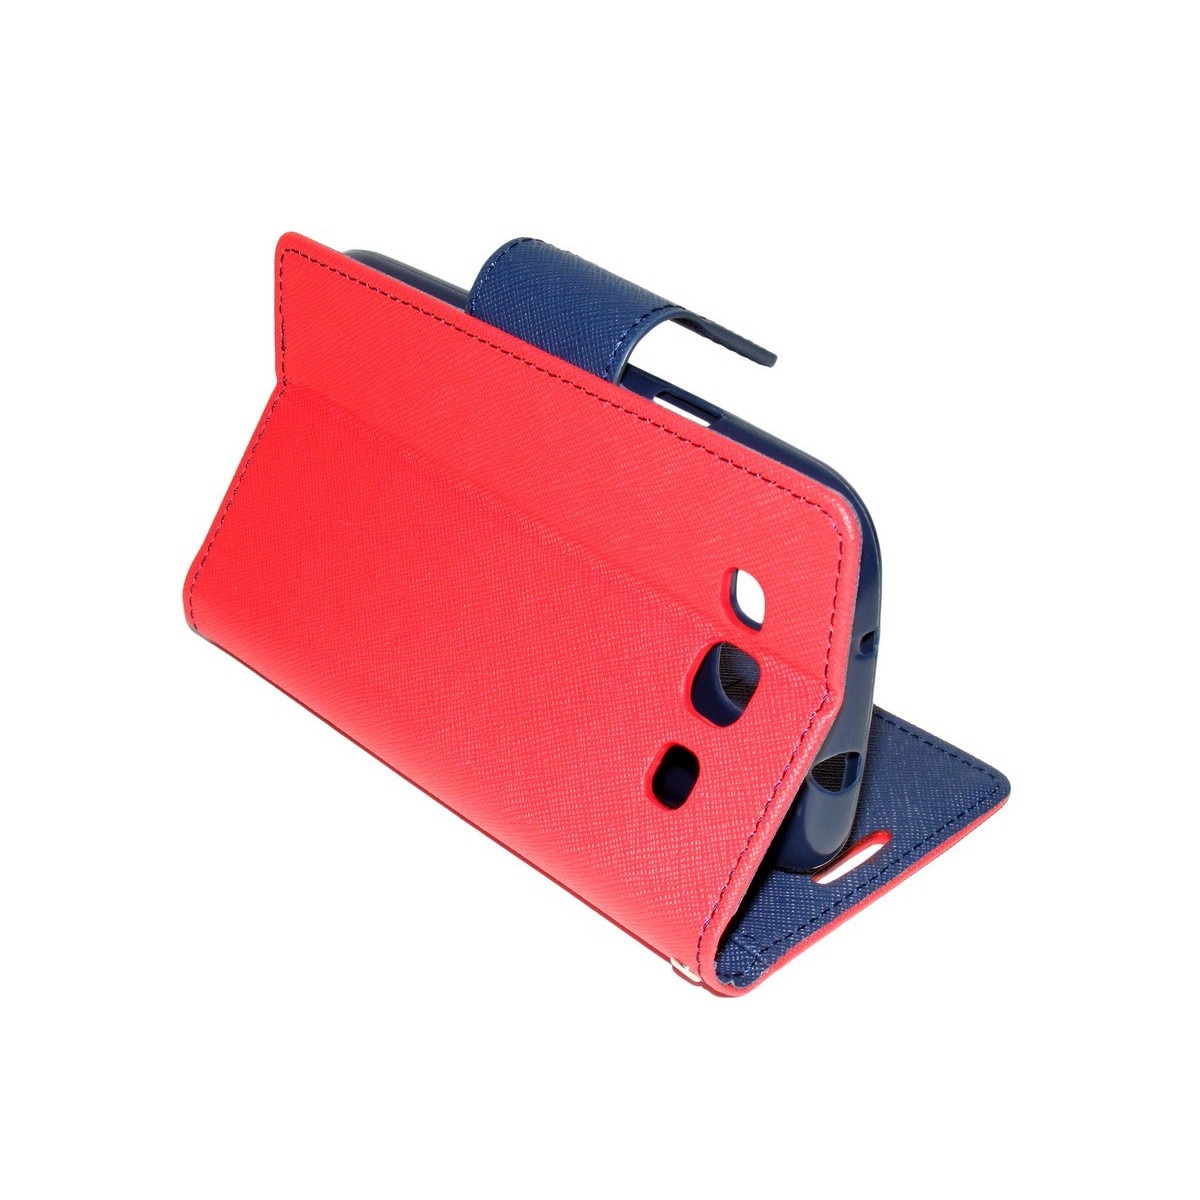 Mandated dull Canoe Husa Samsung Galaxy S3 Neo i9301 / S3 i9300 Fancy Book Red-Blue - eMAG.ro